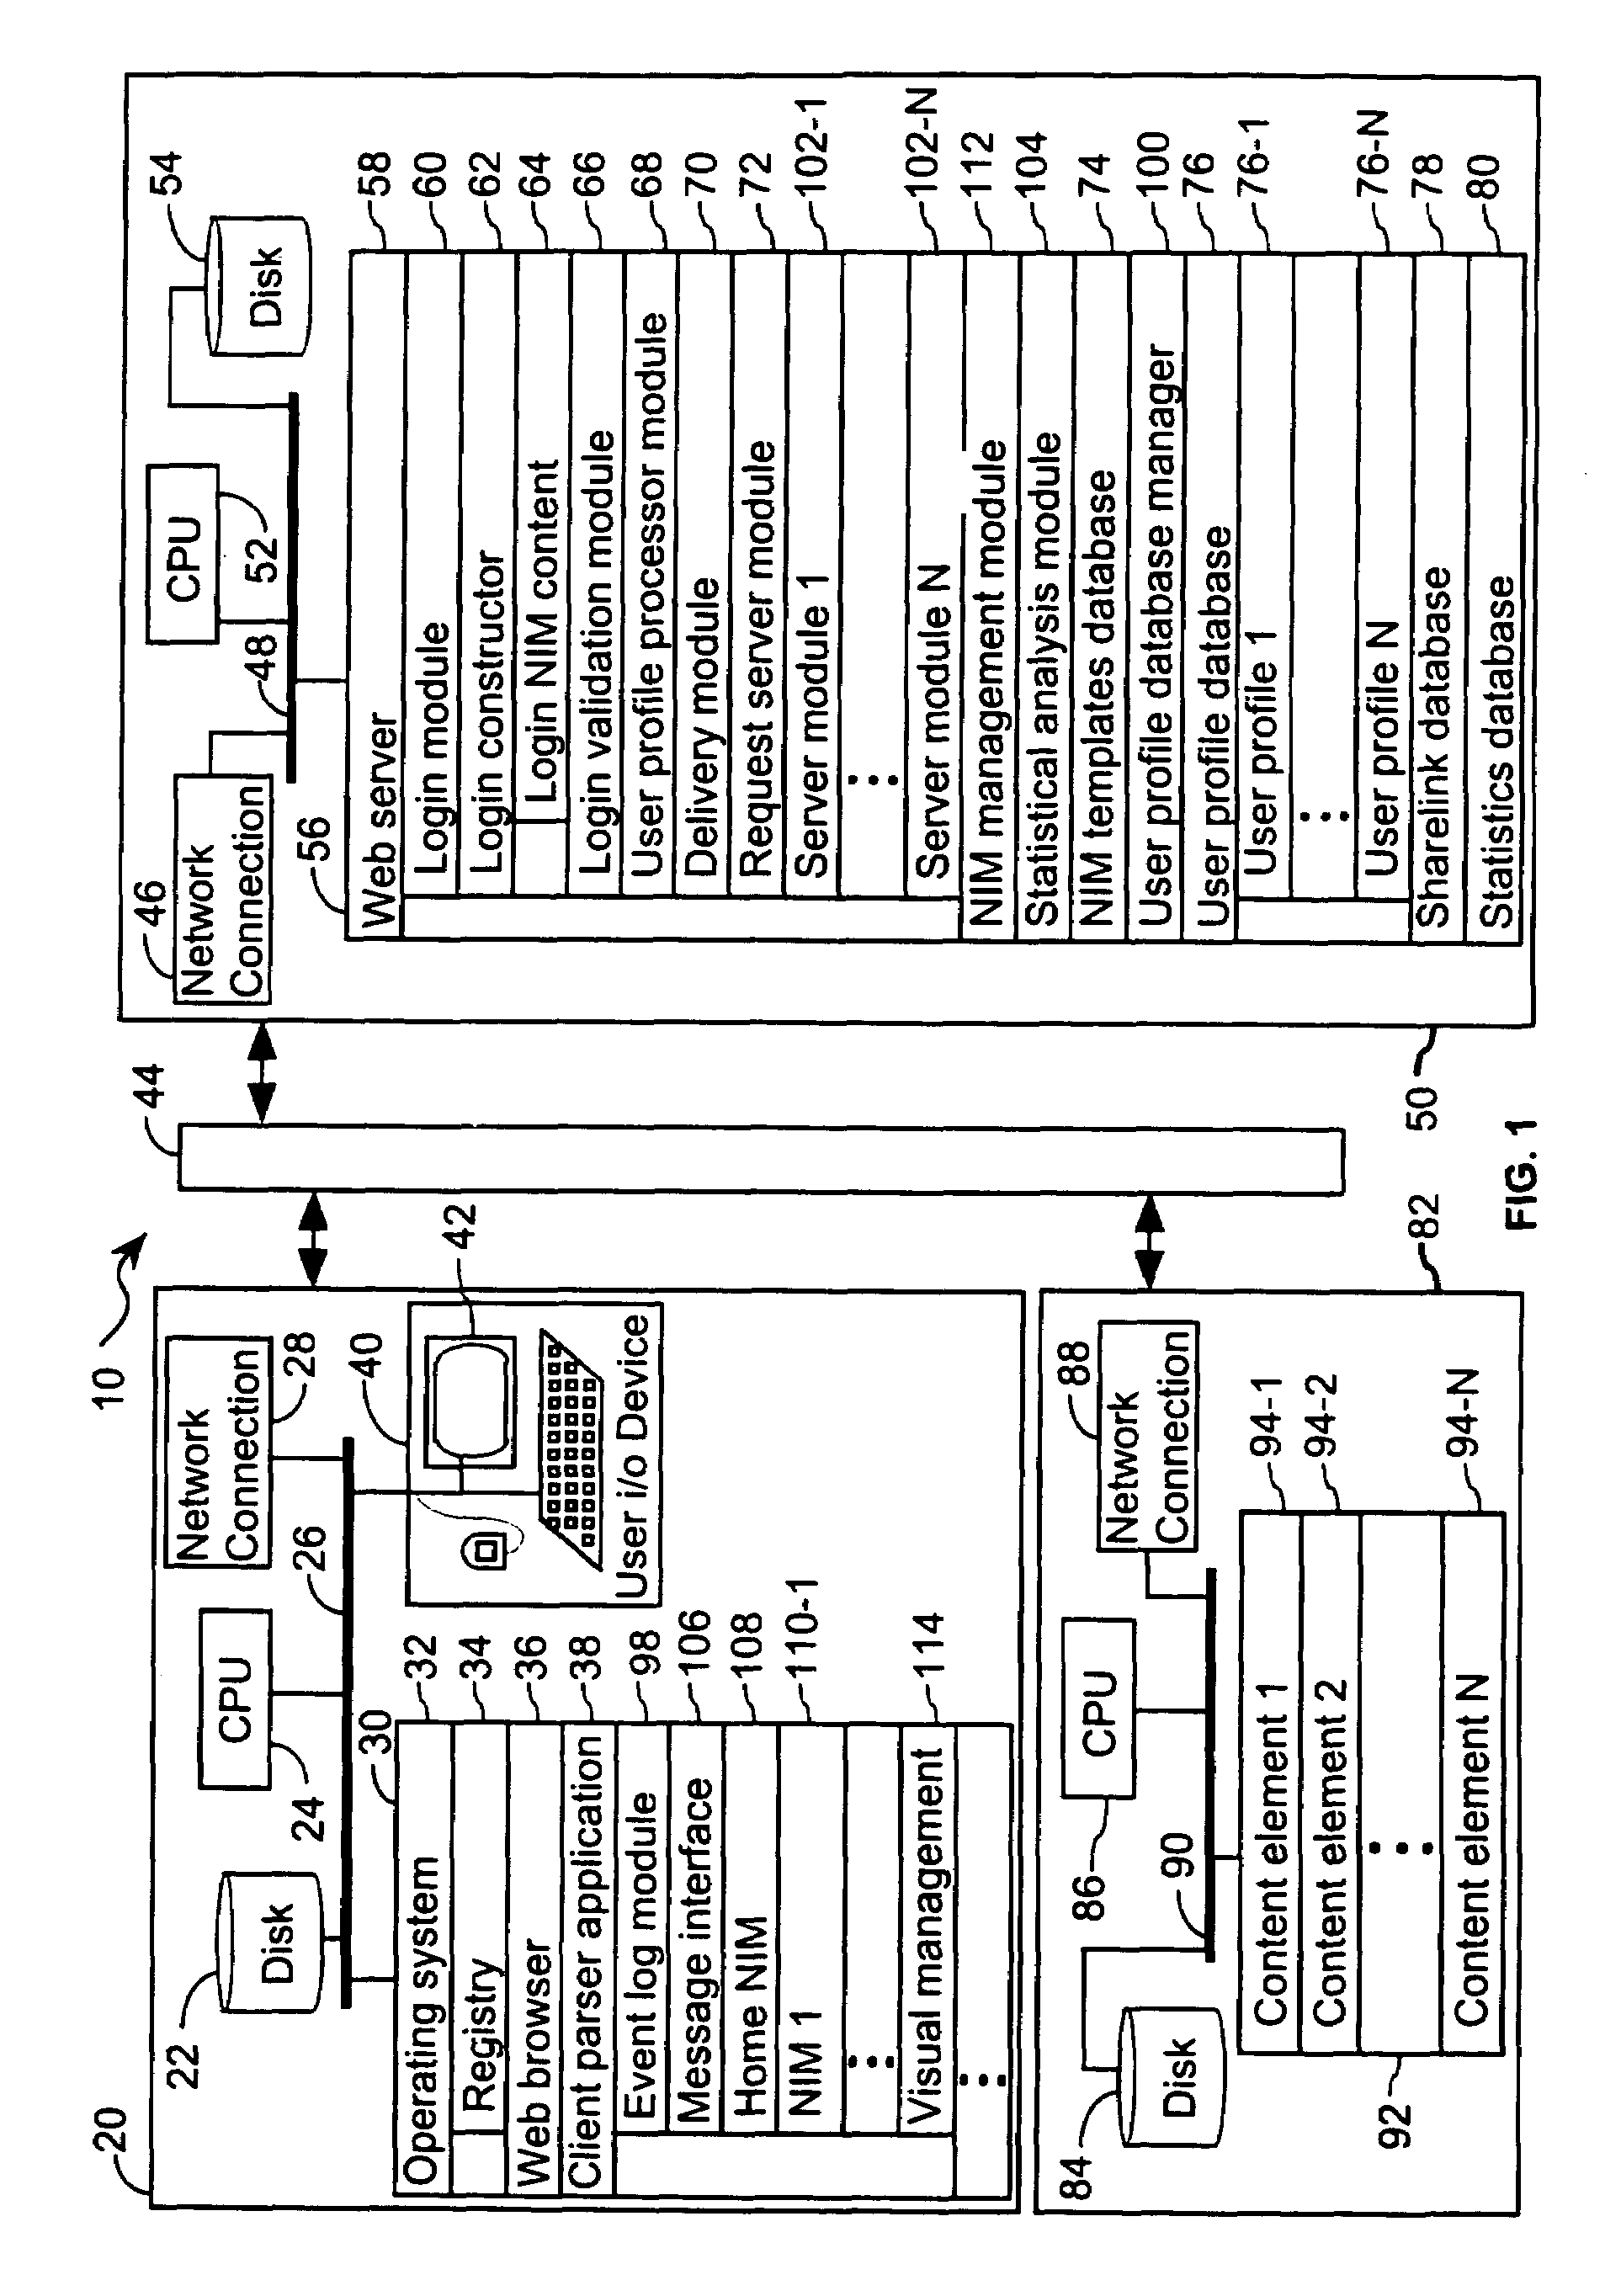 Apparatus and method for tracing the distribution of diversely sourced internet content